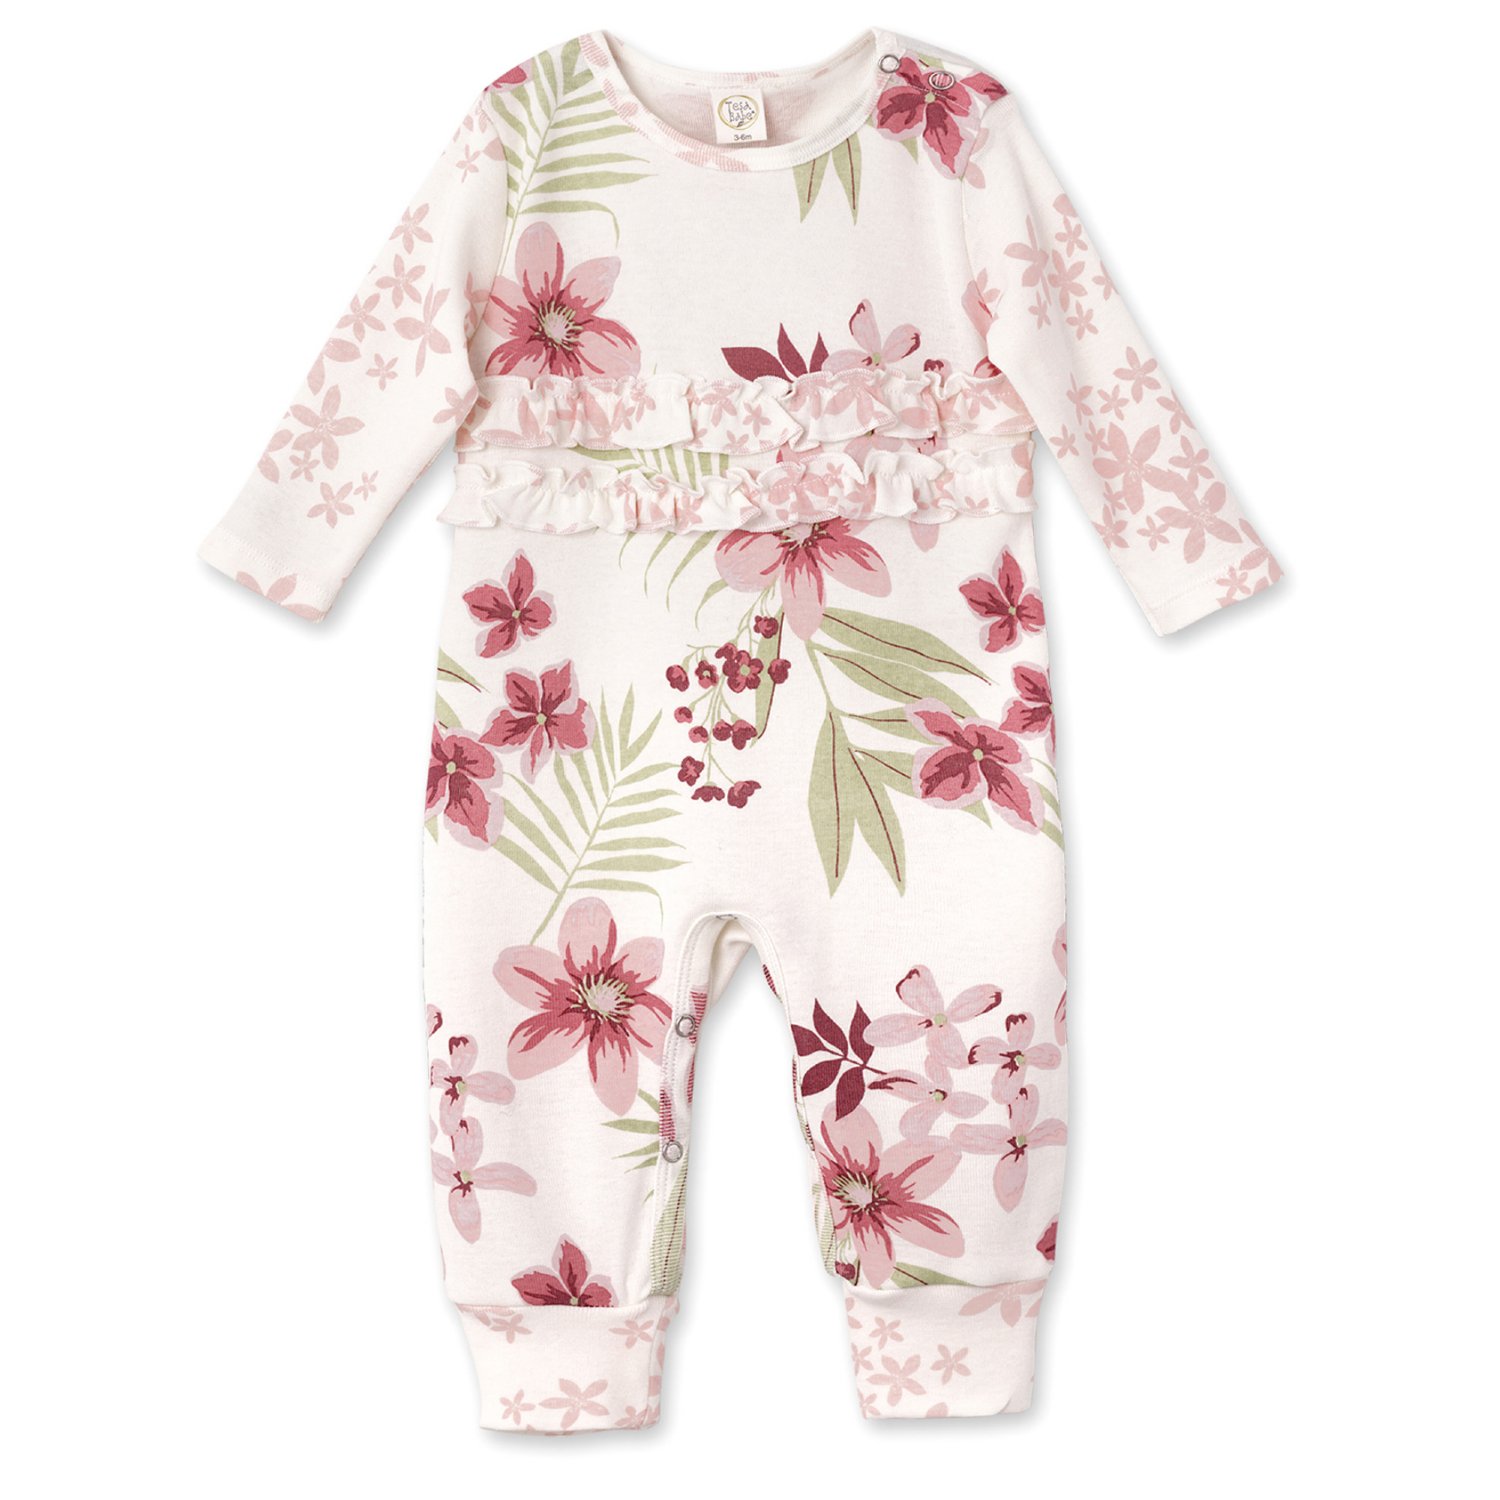 Tesa Babe Tropical Blooms Ruffle Romper for Baby Girls